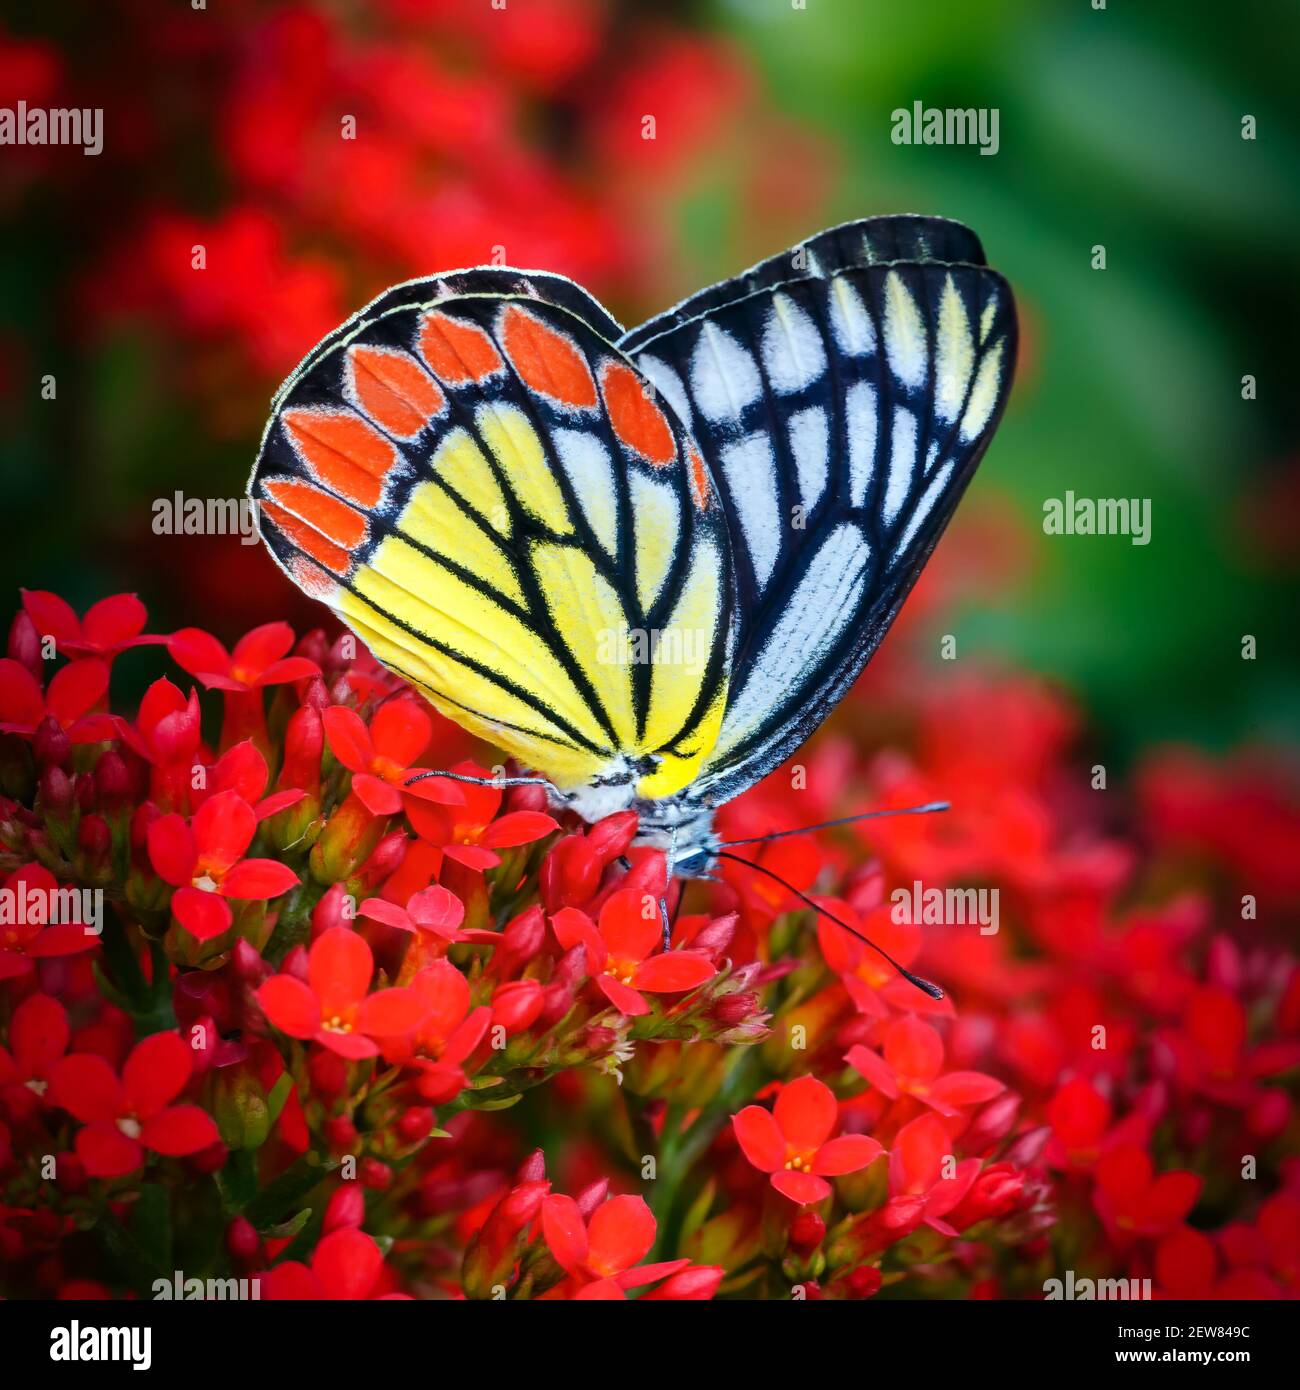 Painted butterfly common Jezebel or Delias eucharis, Pieridae family, with closed wings in multiple red Kalanchoe flowers with dark colorful red green Stock Photo